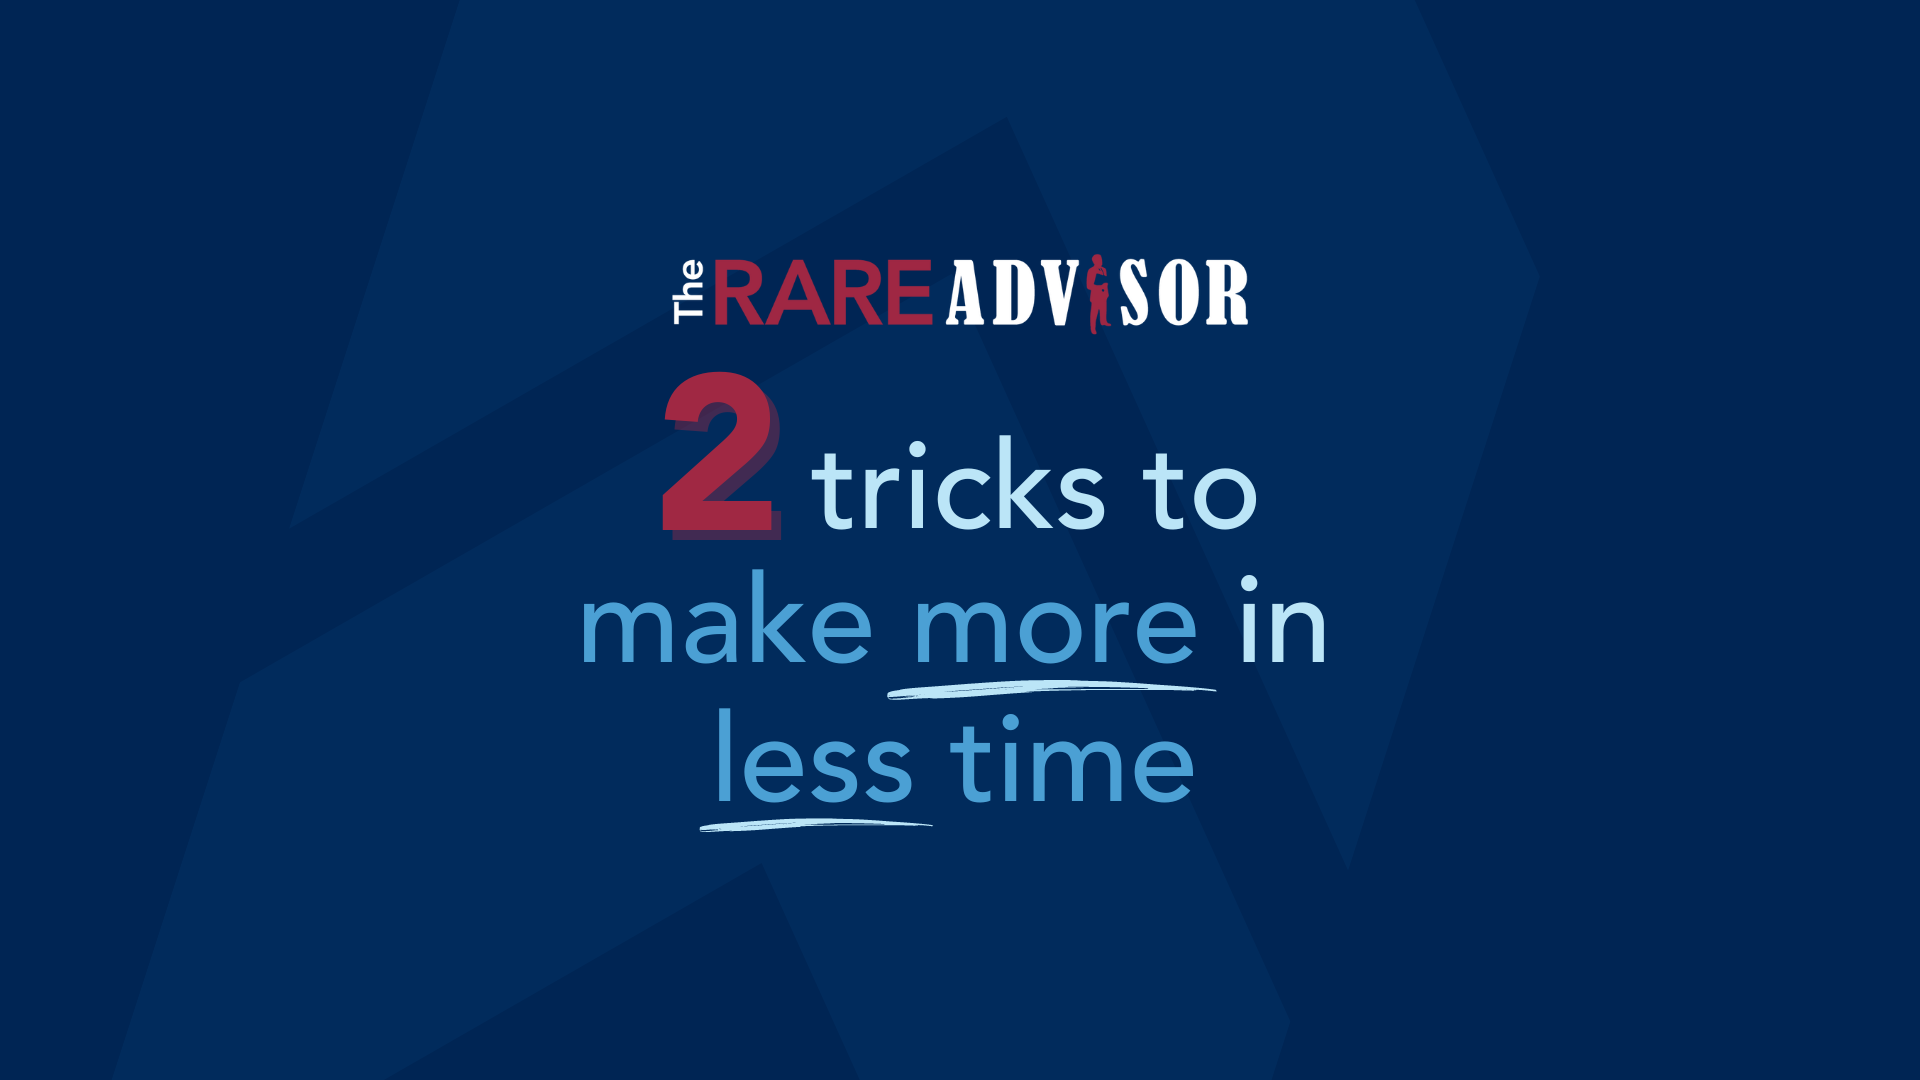 The RARE Advisor: Two Tricks to Make More in Less Time this Summer